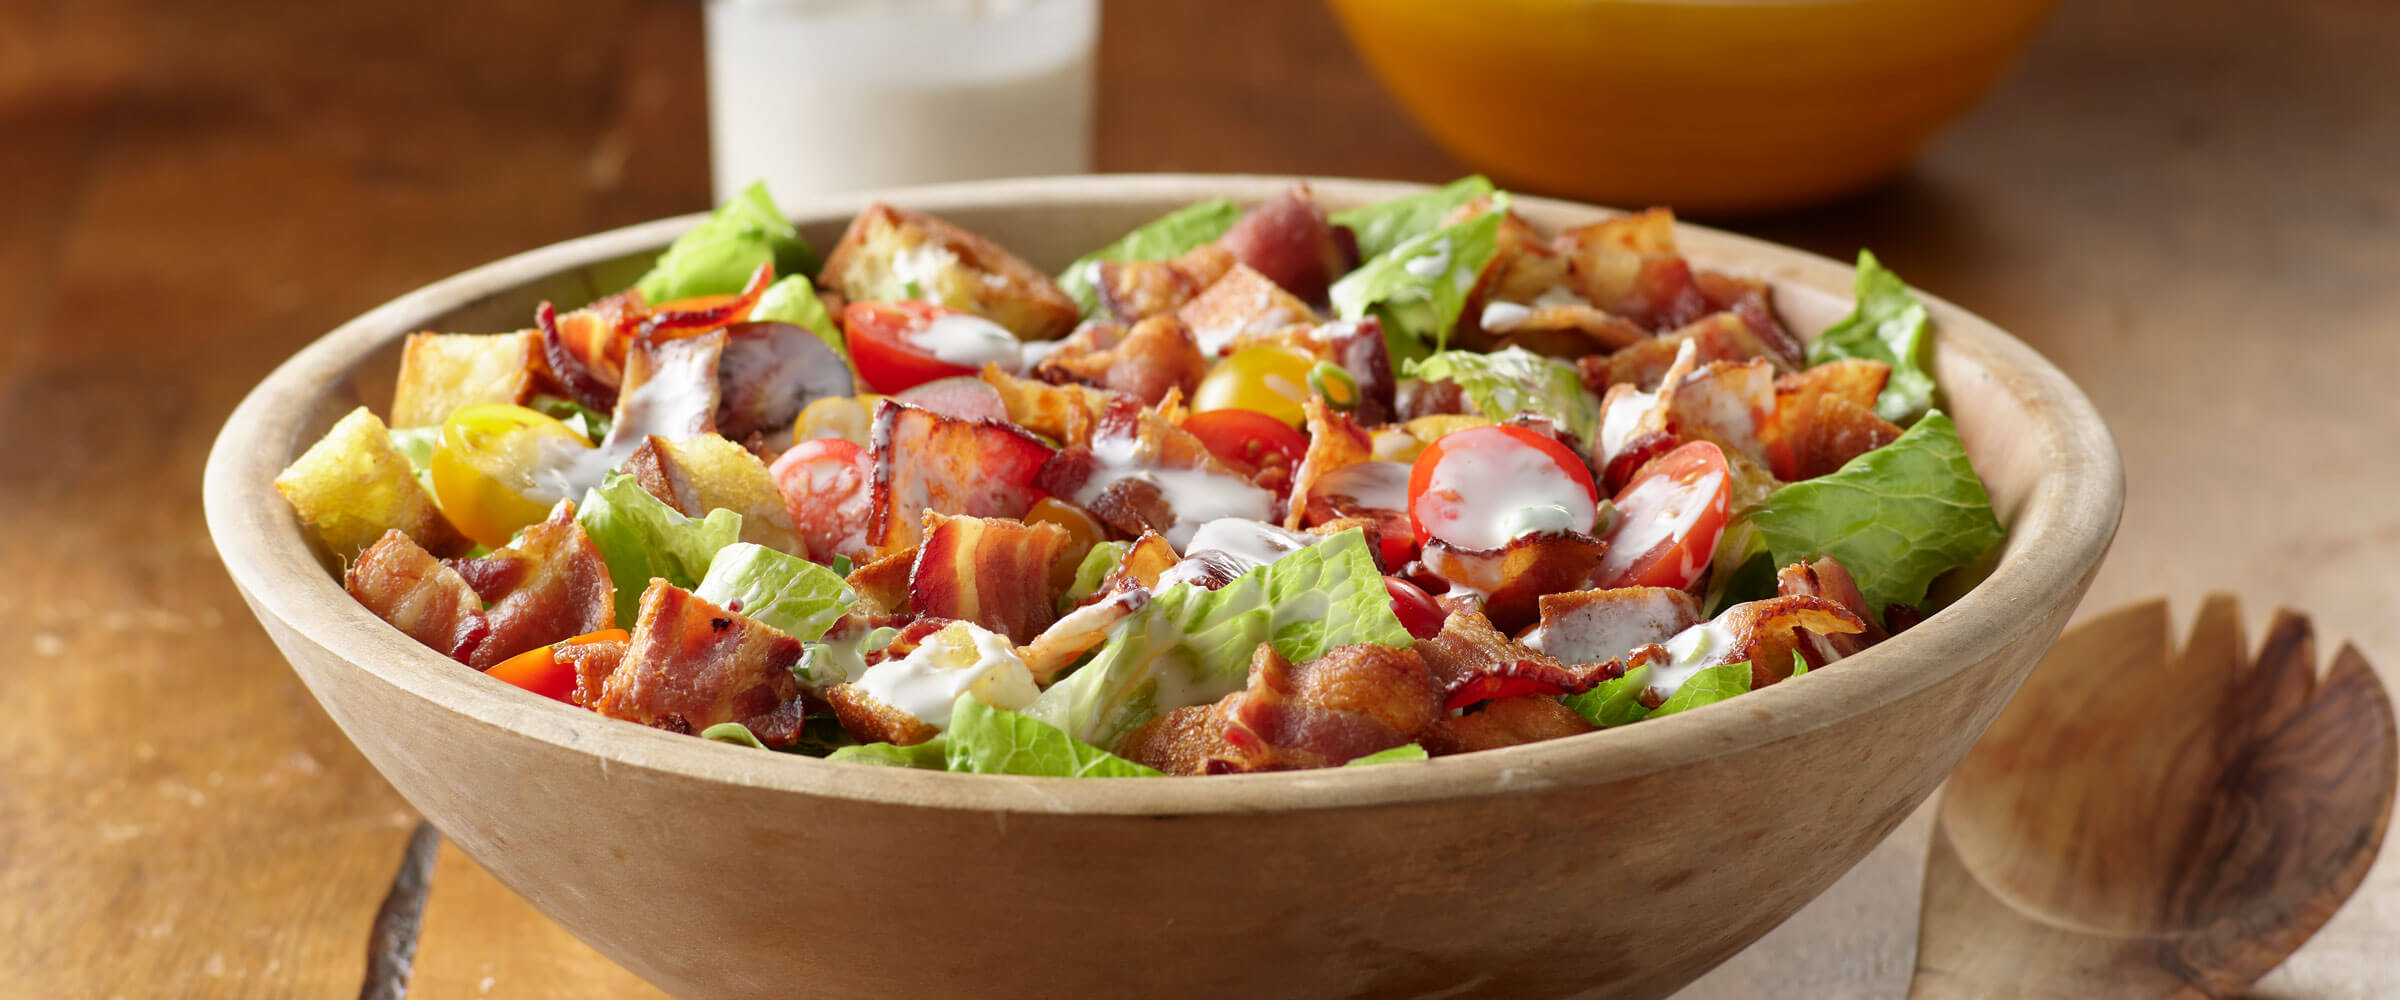 BLT Salad in wooden bowl with serving spoon